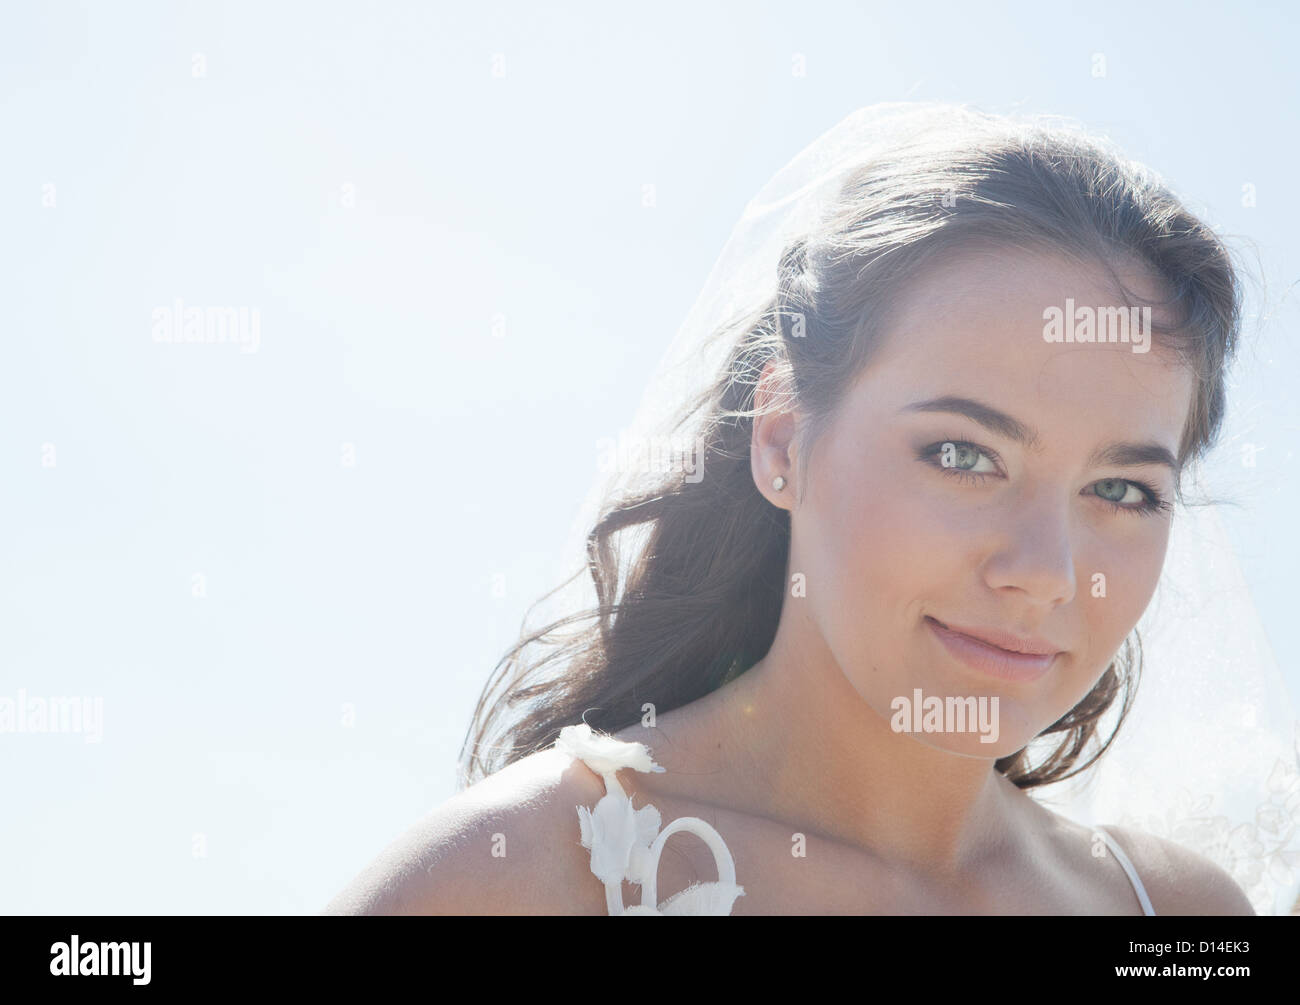 Smiling woman standing outdoors Stock Photo